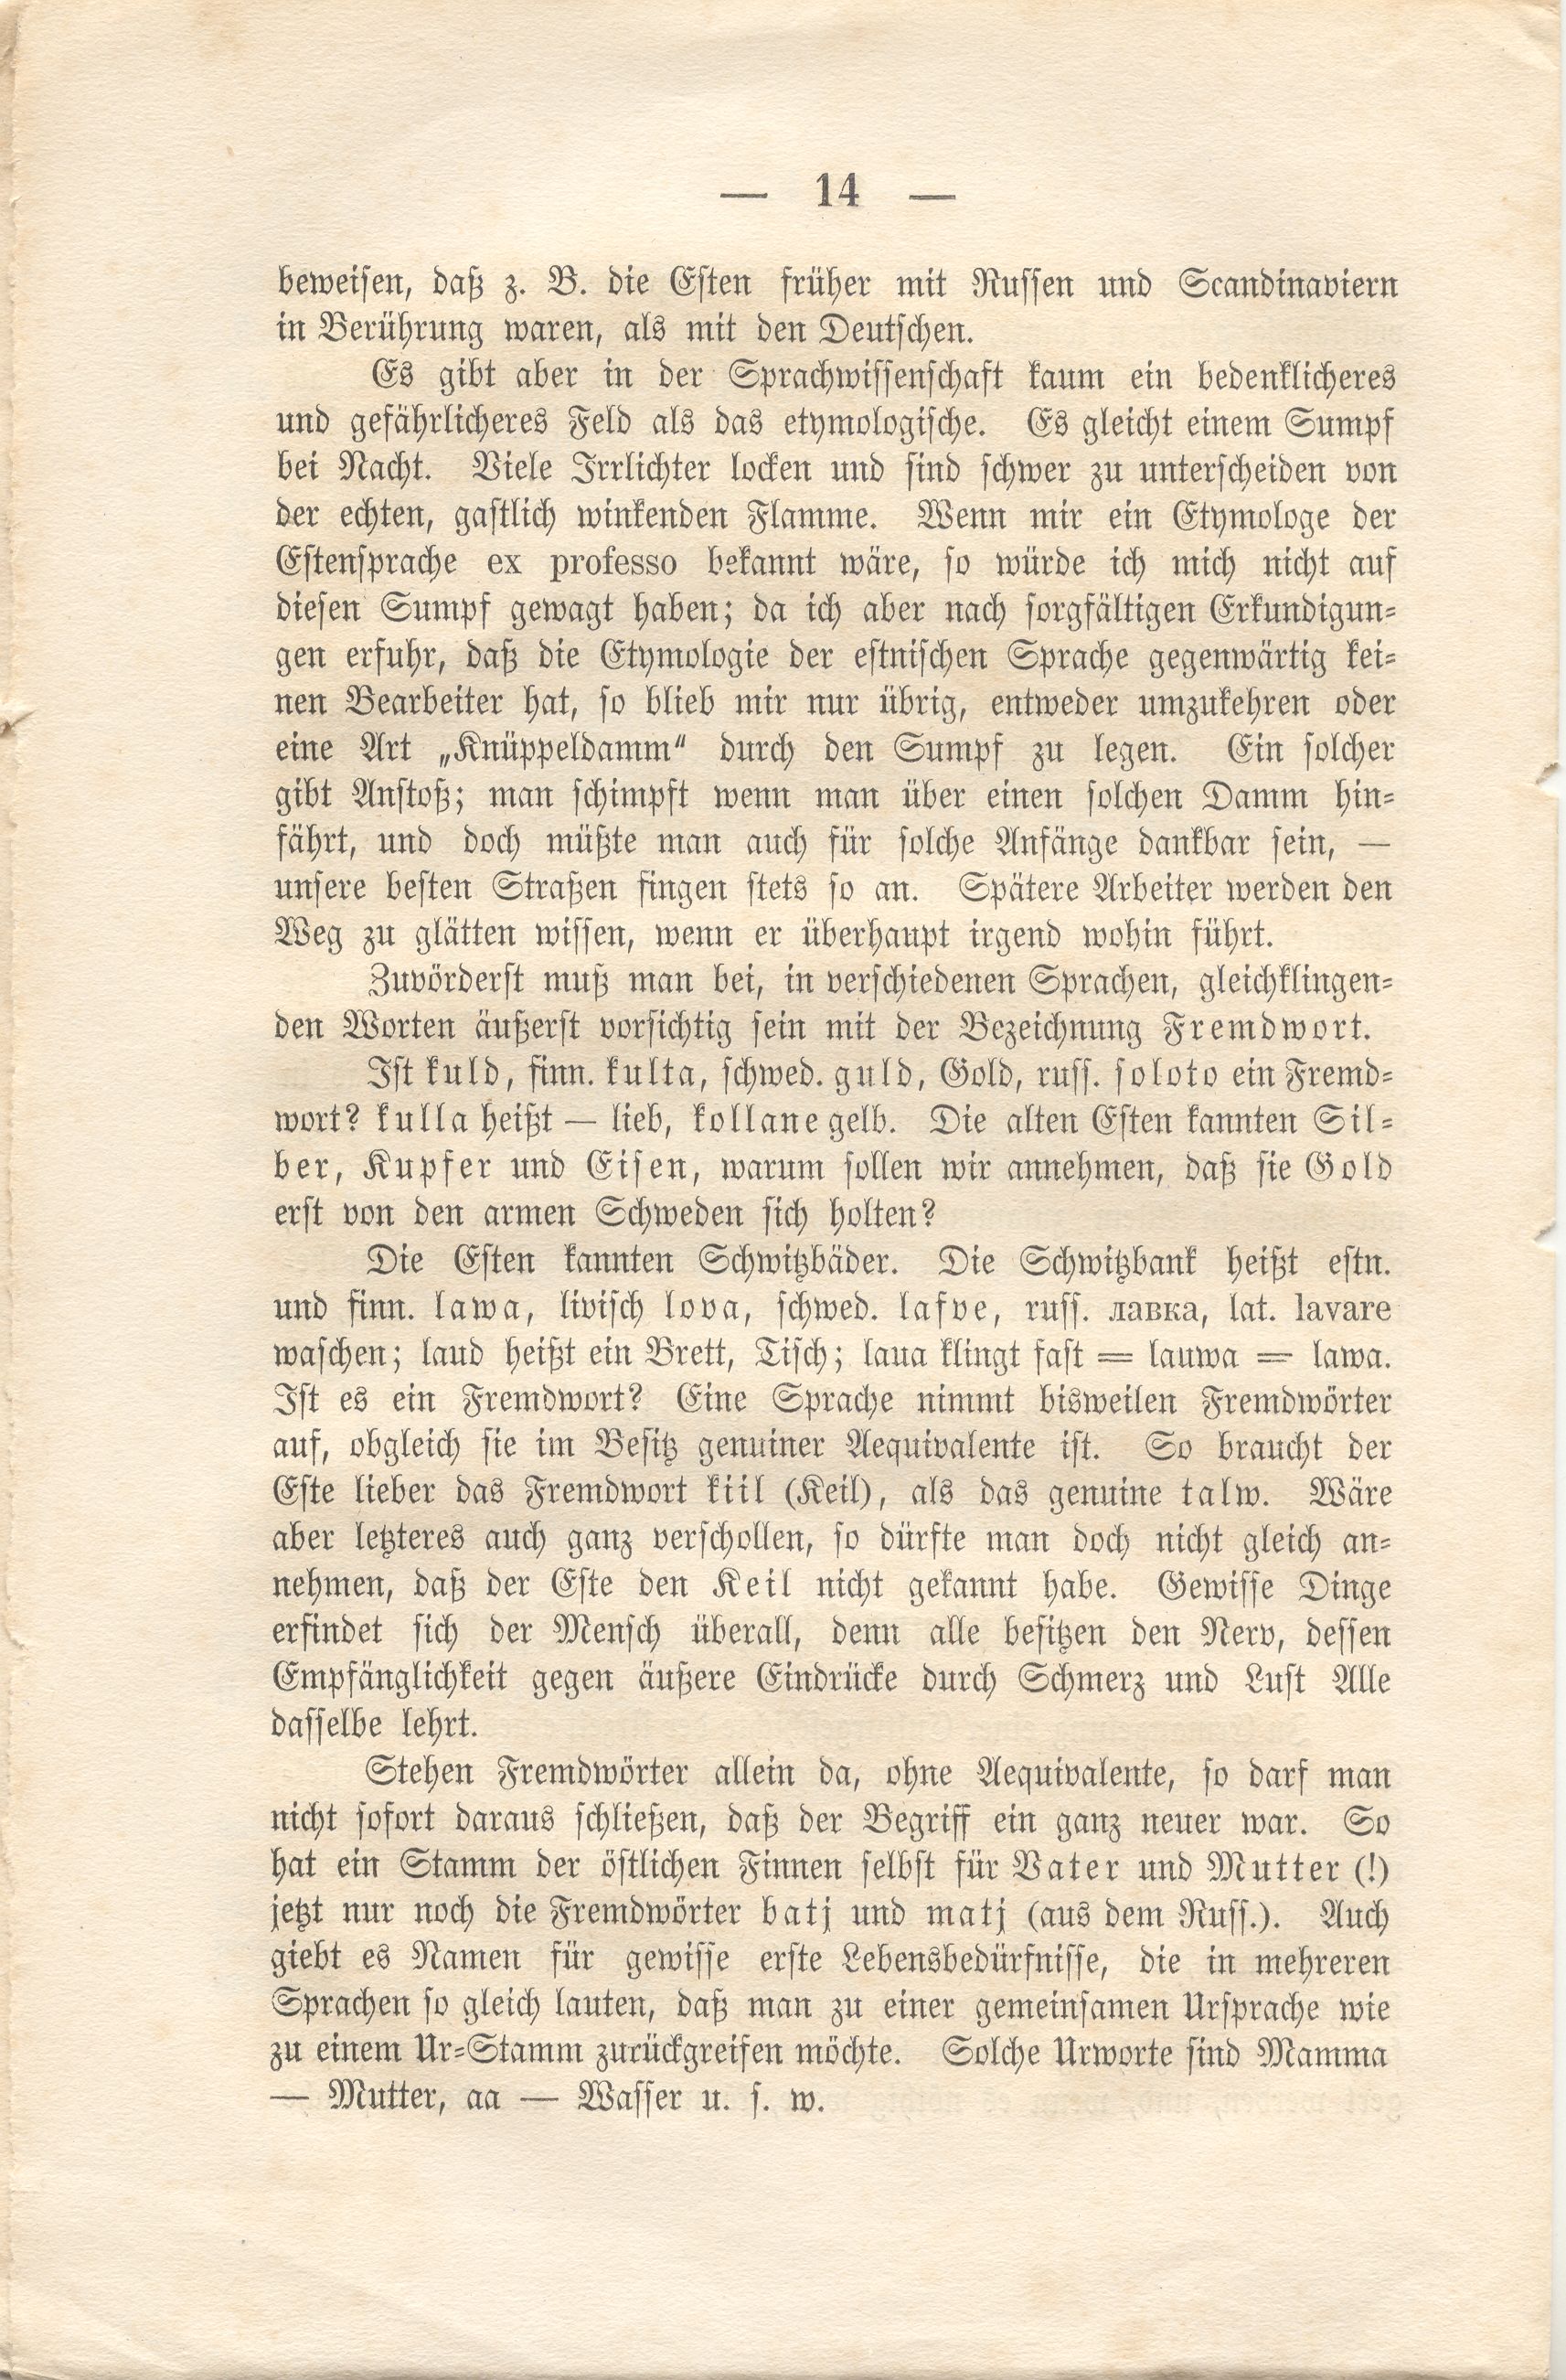 Wagien (1868) | 18. (14) Main body of text